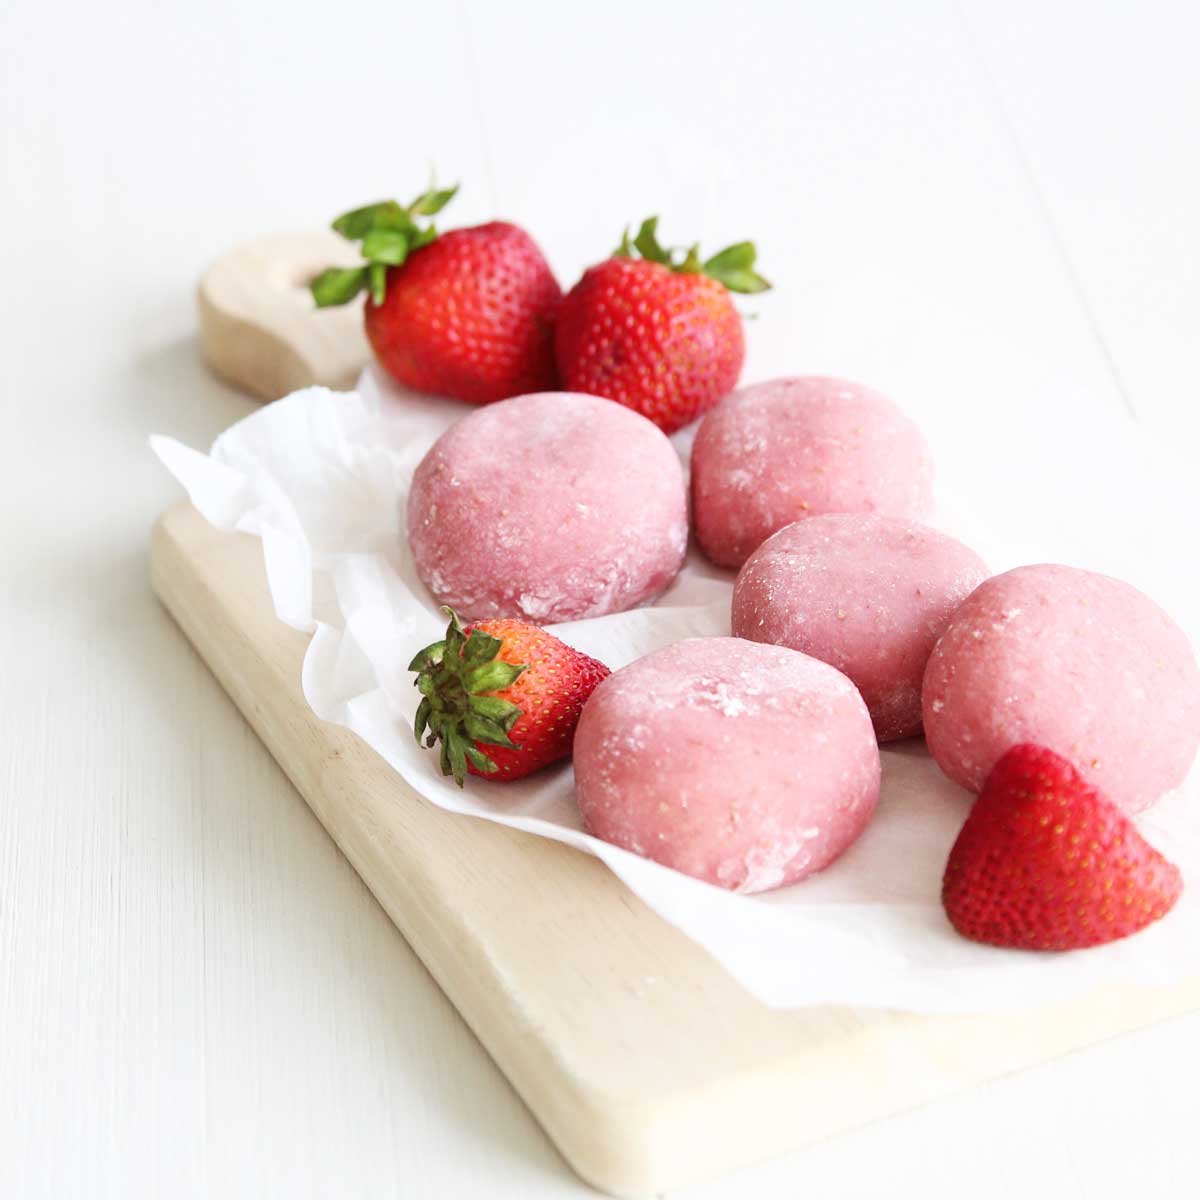 How to Make Healthy Strawberry Mochi (Made in the Microwave) - chocolate covered strawberry mochi